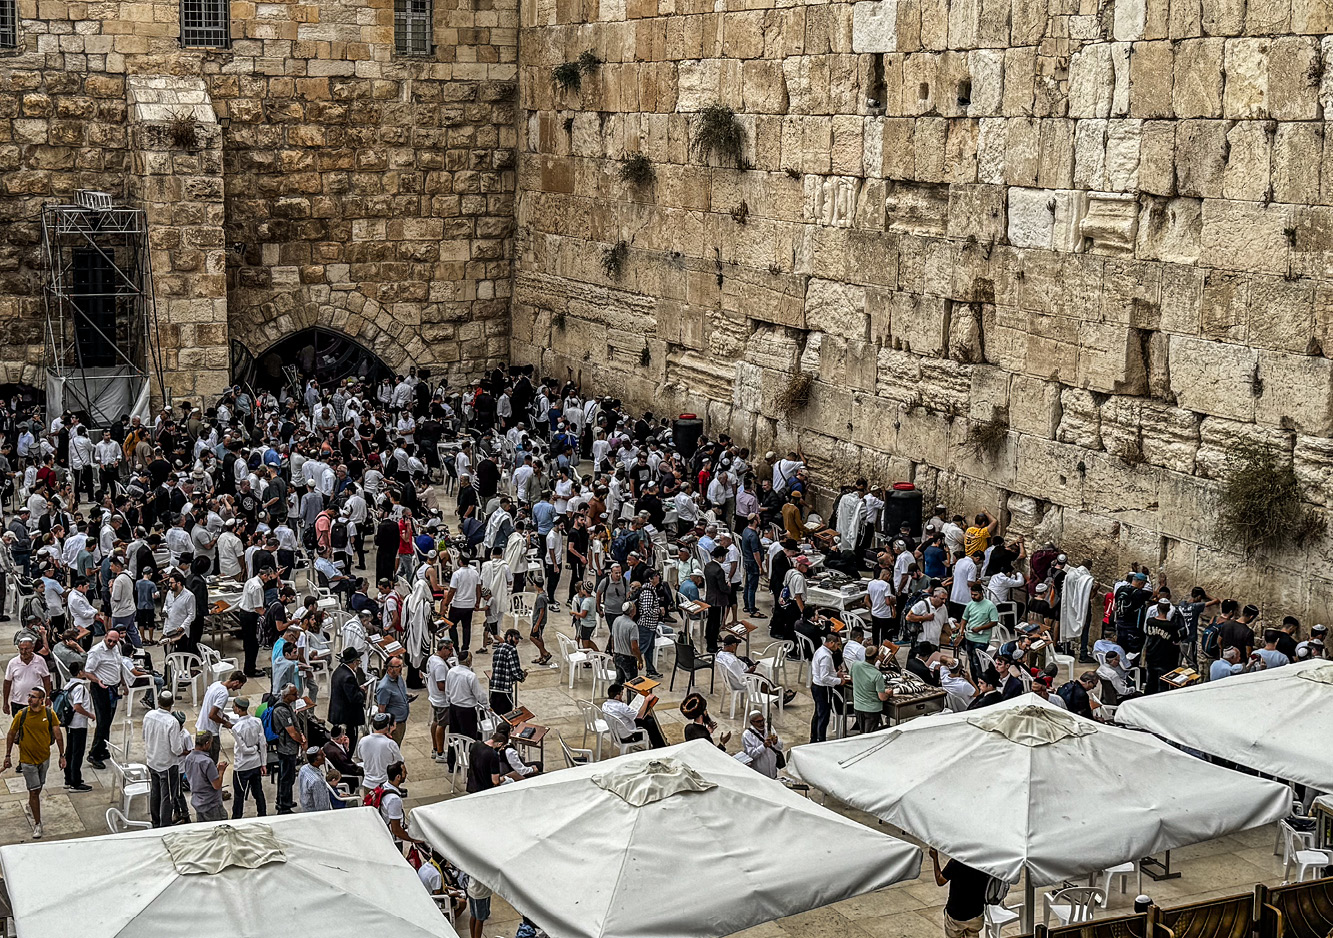 Thousands of Jews gather at the Western Wall daily in Old City at this most holy place to pray.